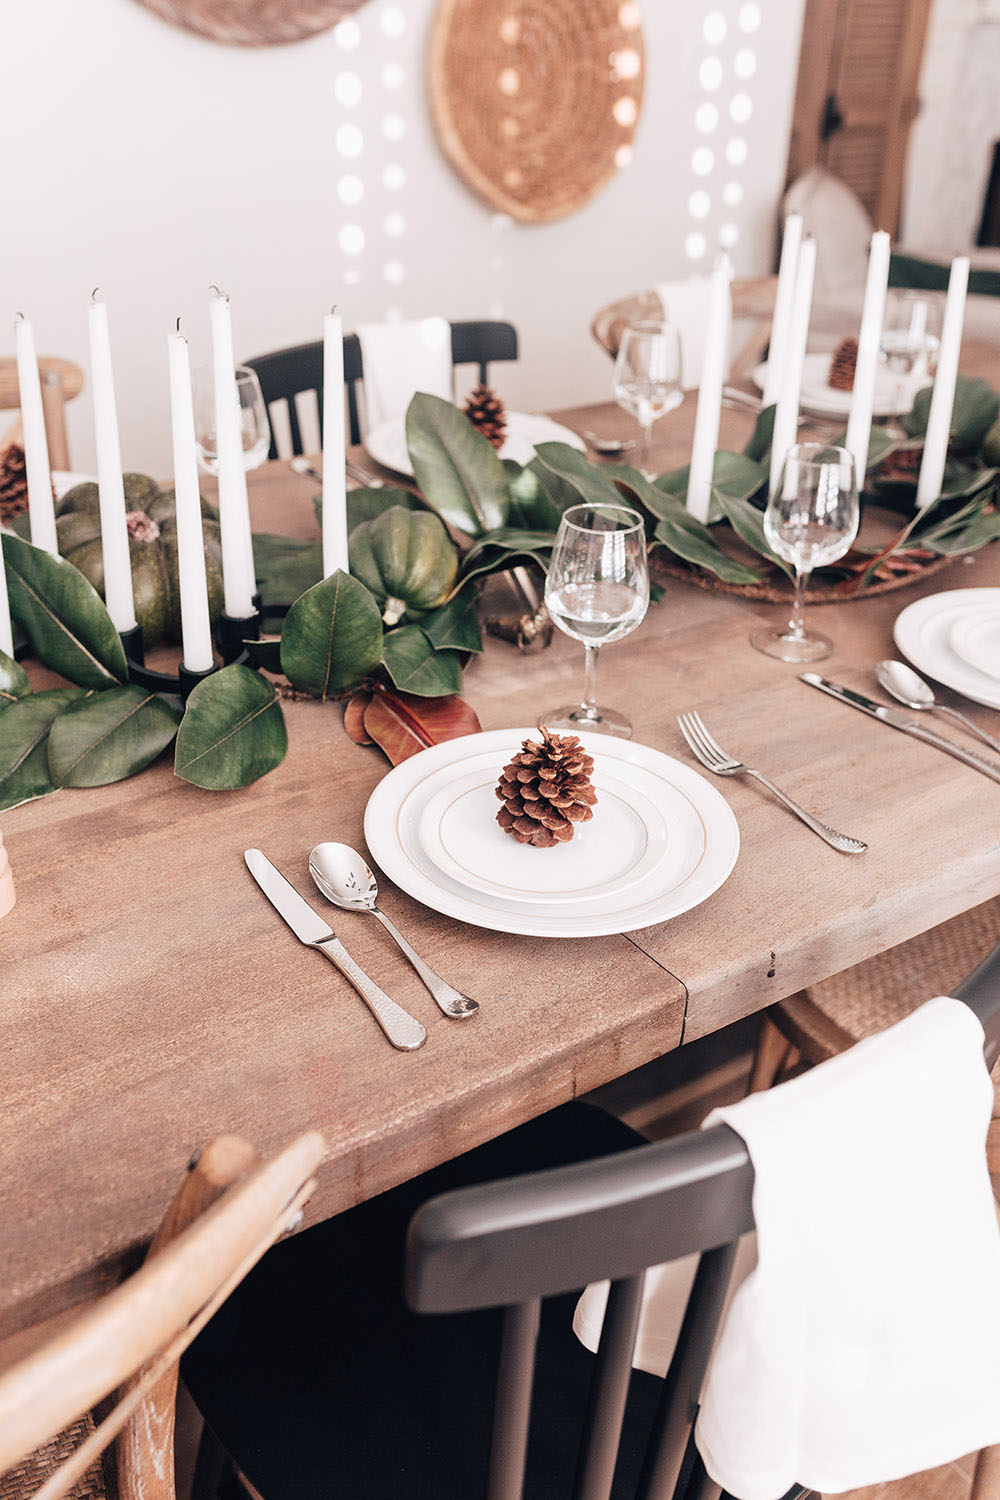 A rustic tablescape featuring white plates, cutlery, glasses, and table decor.